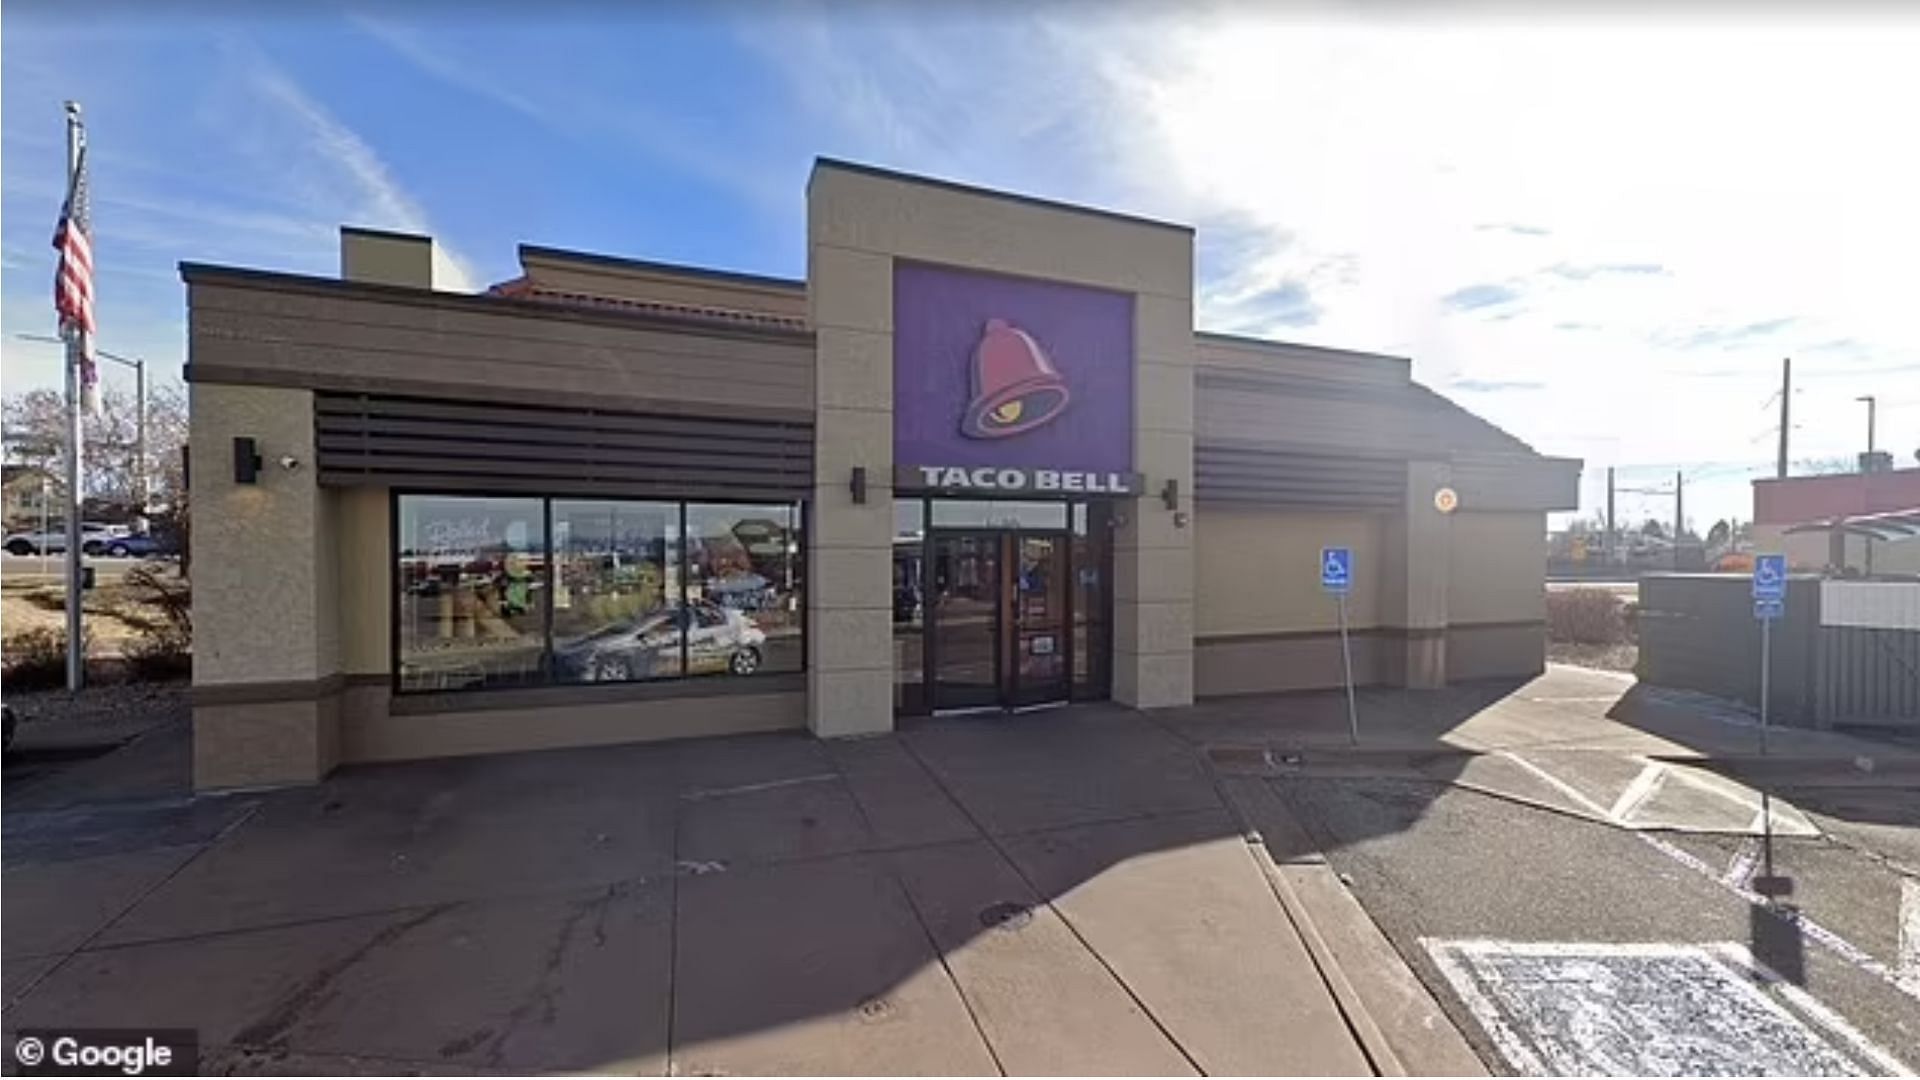 The Taco Bell restaurant in question where the incident is said to have taken place (Image via Google Maps)